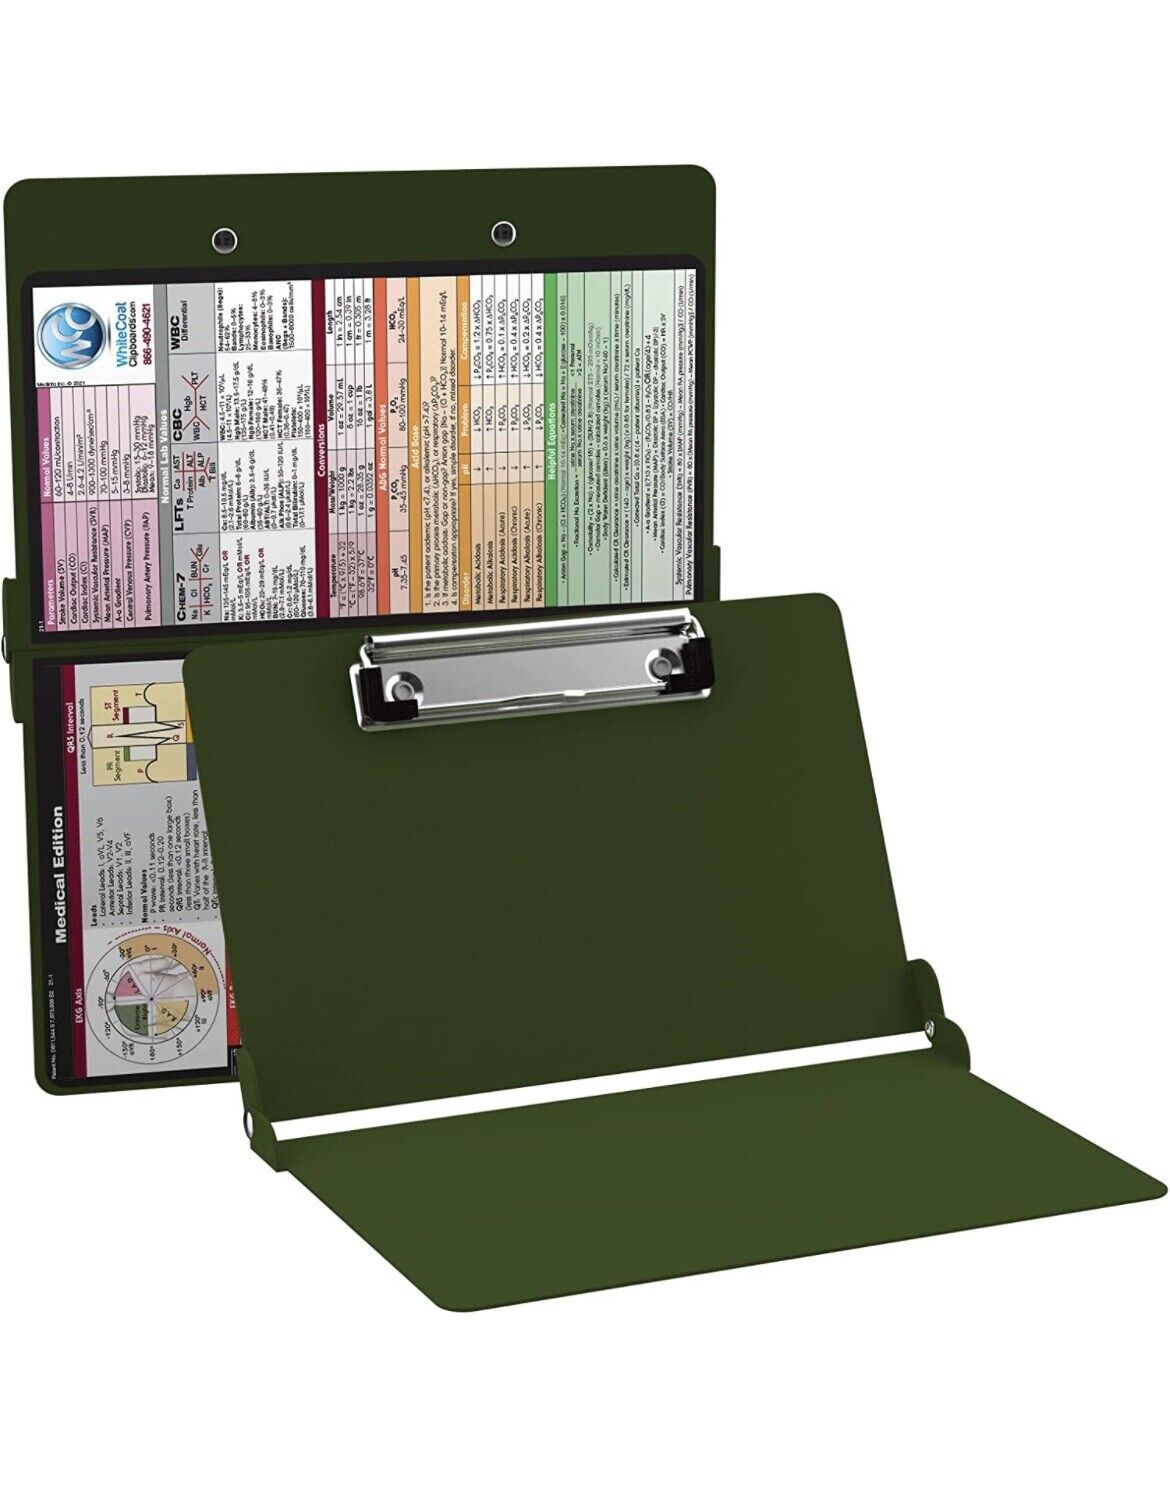 Whitecoat Clipboard - Green - Medical Edition. Brand New - In Packaging